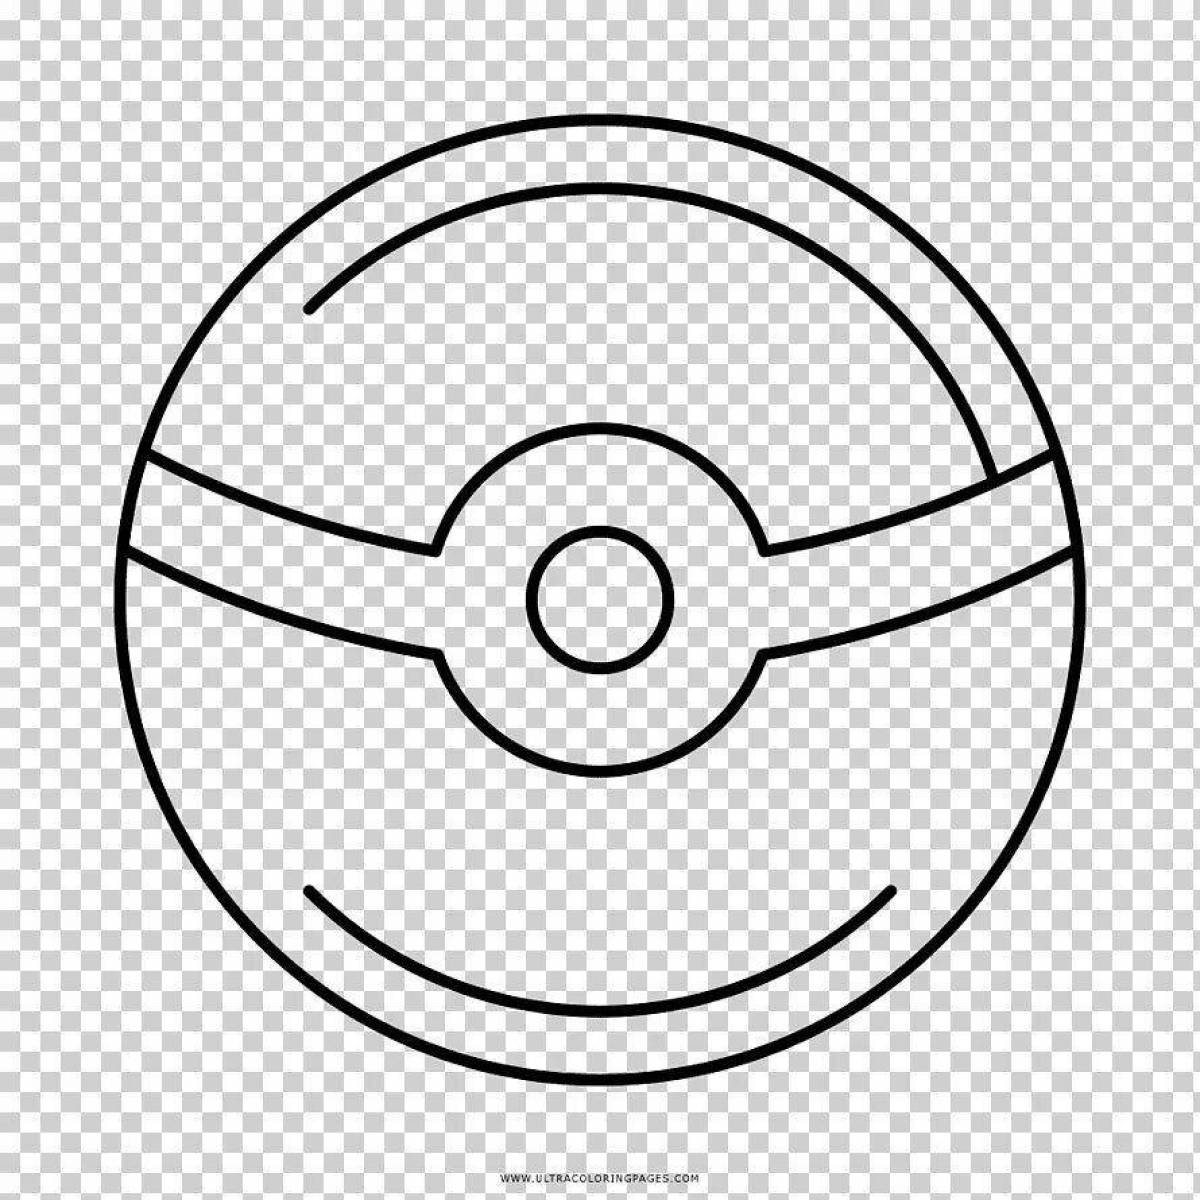 Fancy coloring pikachu and pokeball